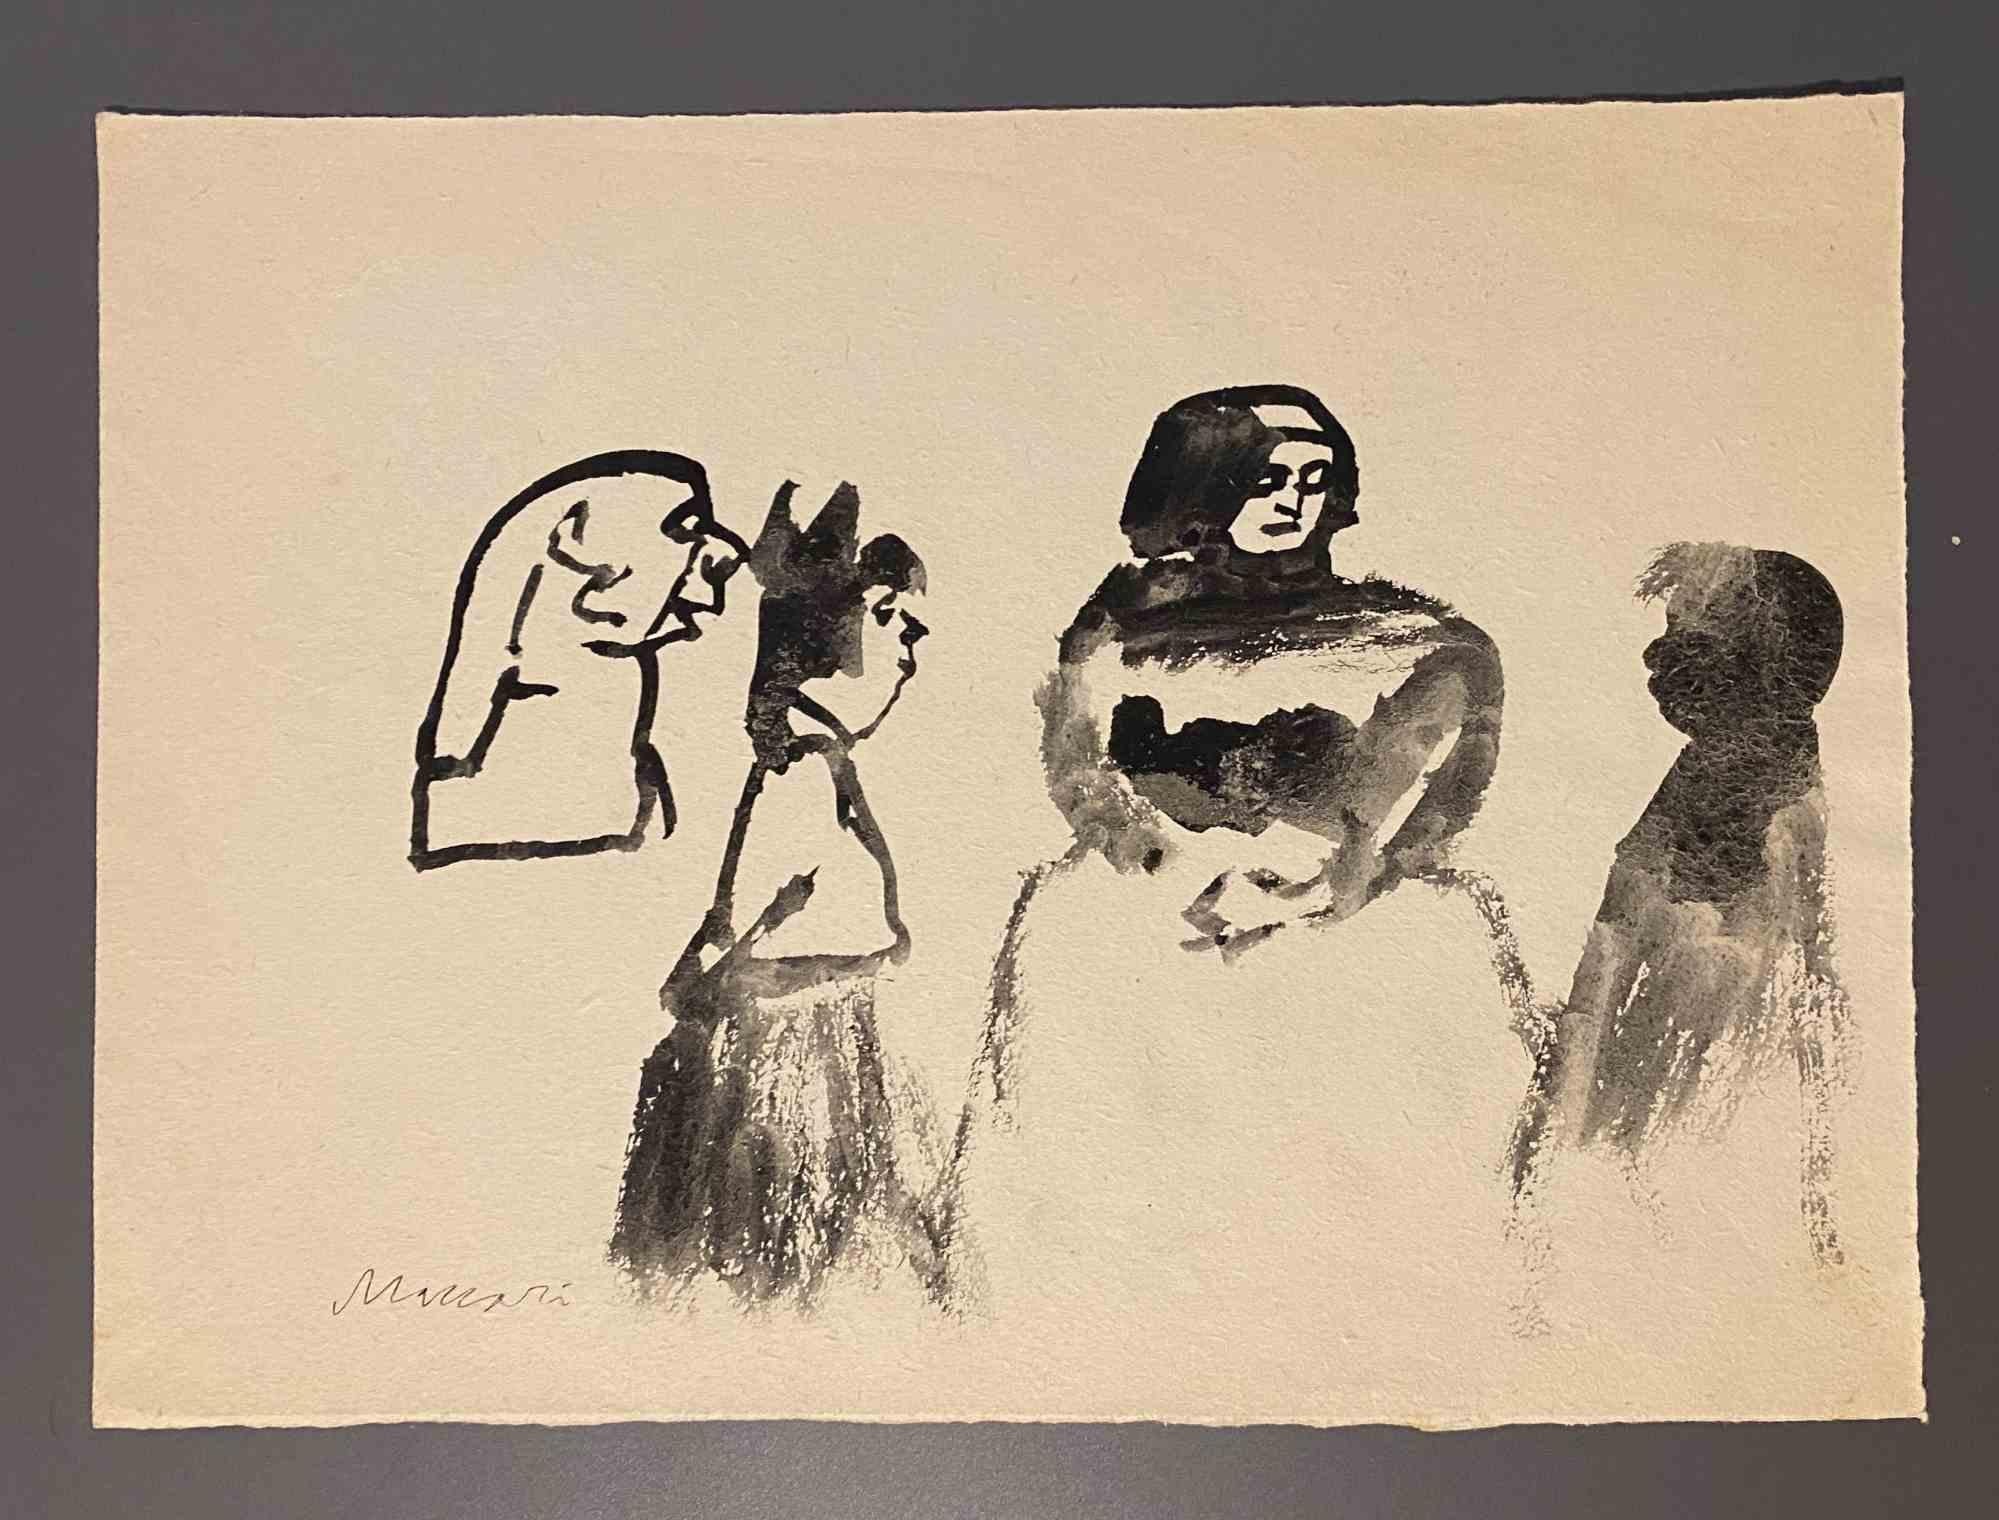 Figures is a watercolor Drawing realized by Mino Maccari  (1924-1989) in the Mid-20th Century.

Hand-signed on the lower.

Good conditions.

Mino Maccari (Siena, 1924-Rome, June 16, 1989) was an Italian writer, painter, engraver and journalist,